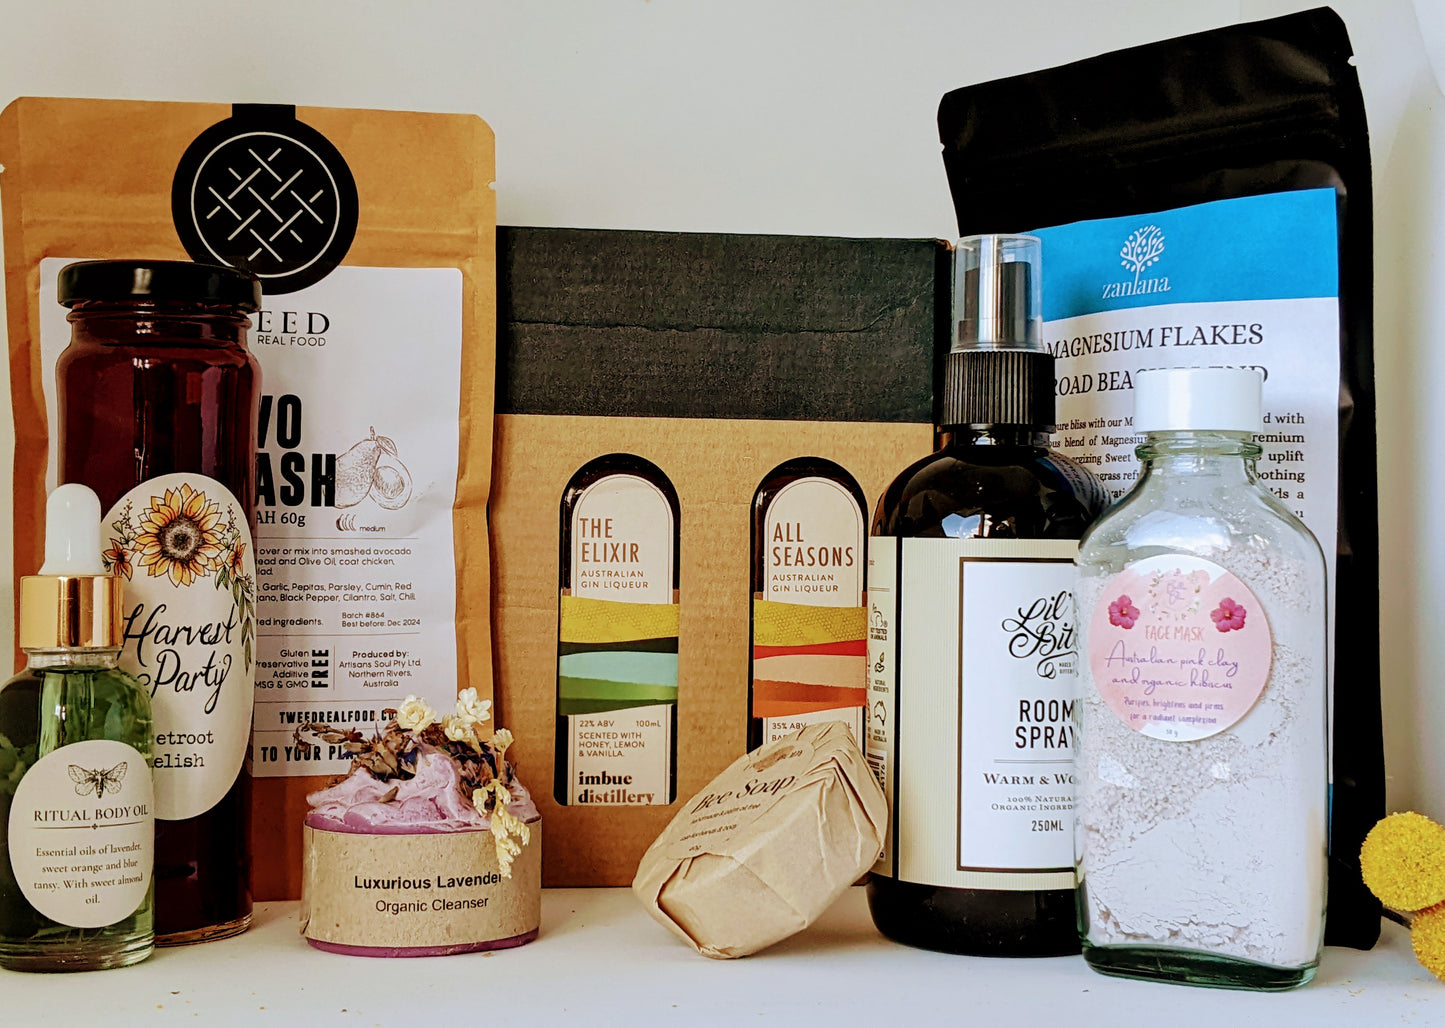 Autumn seasonal mystery box by Arthly Box melbourne. Subscribe to get a free gin sampler. Offer for first 100 subscribers only!